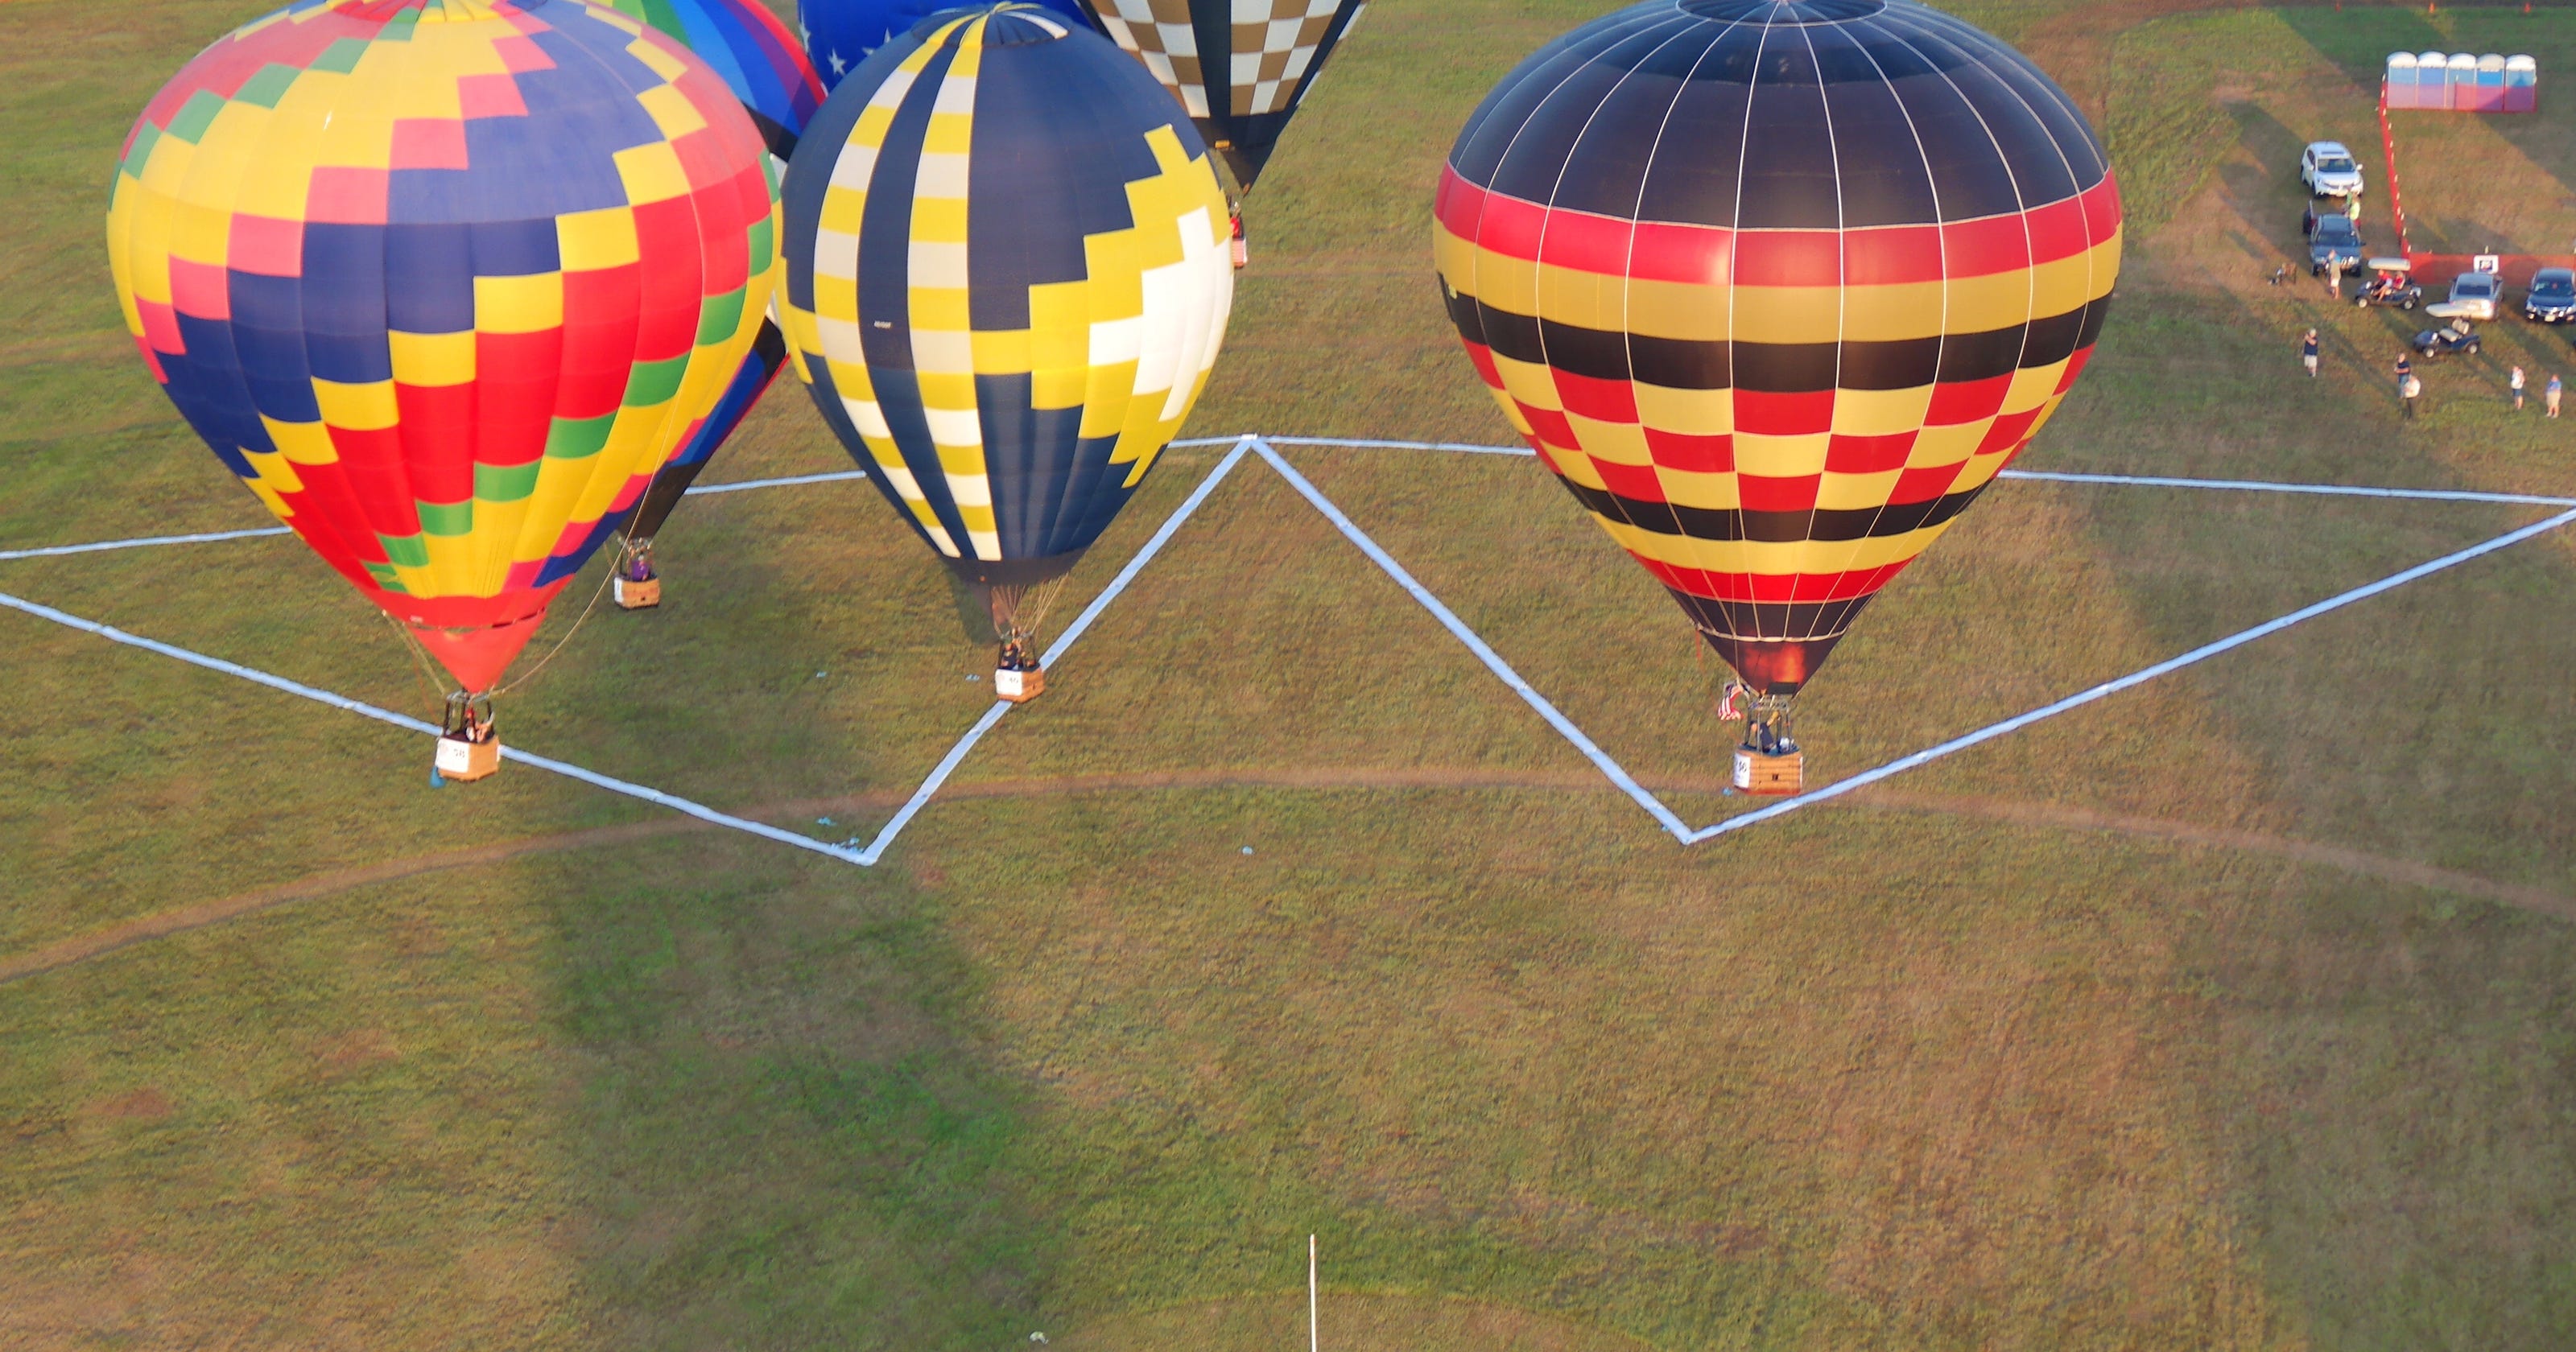 How to understand hot air balloon racing in ShreveportBossier City